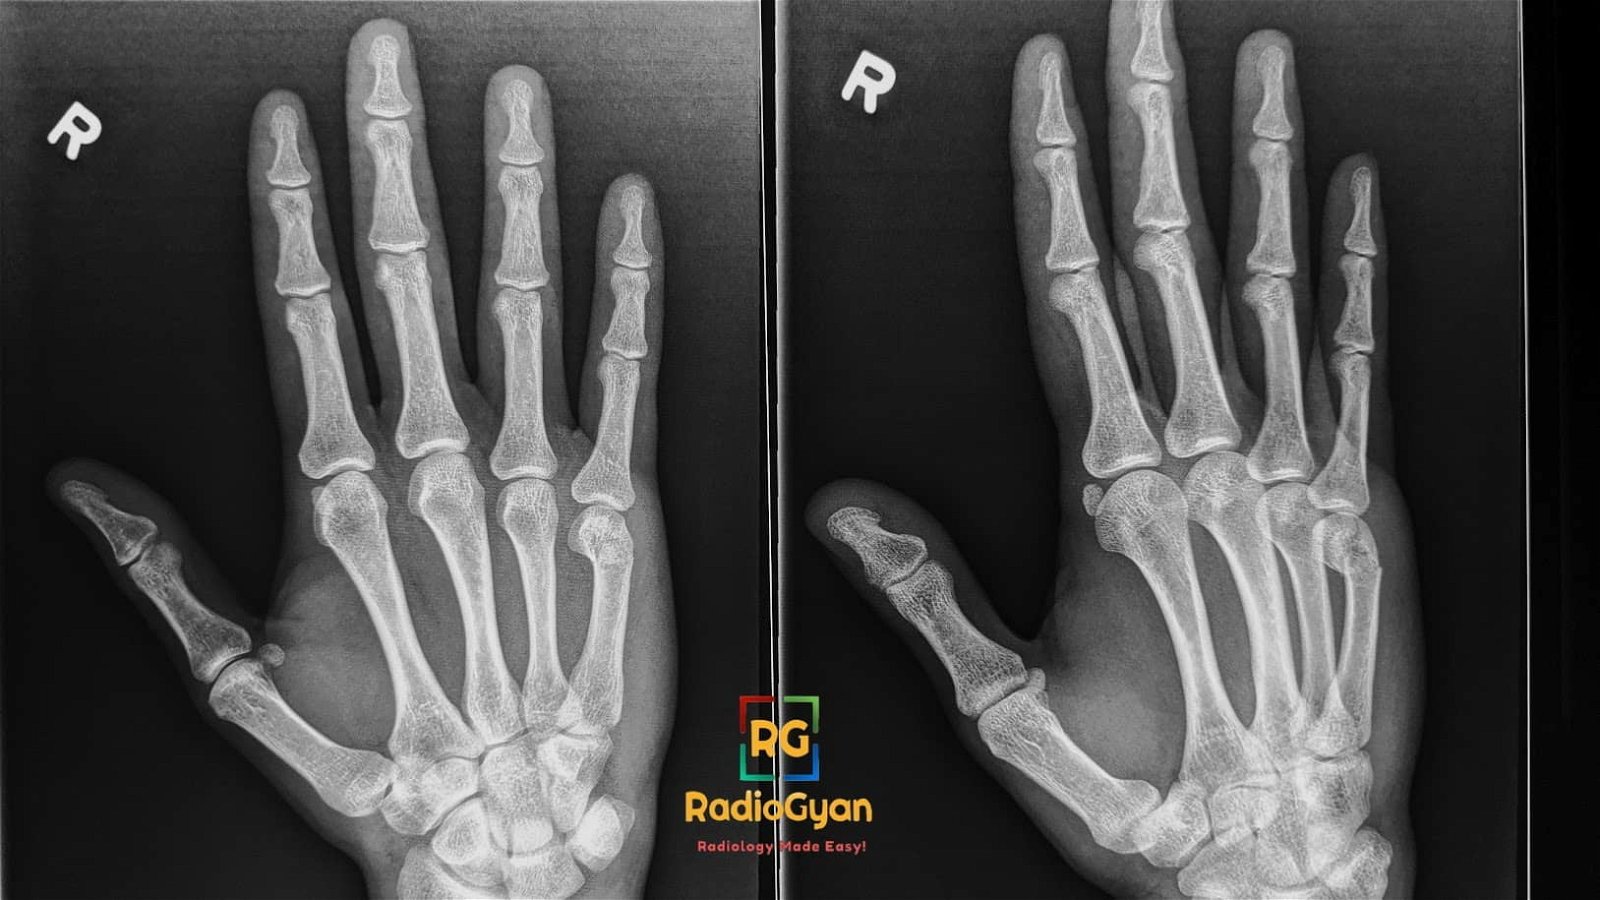 Radiograph showing Boxer's fracture after punch to a wall